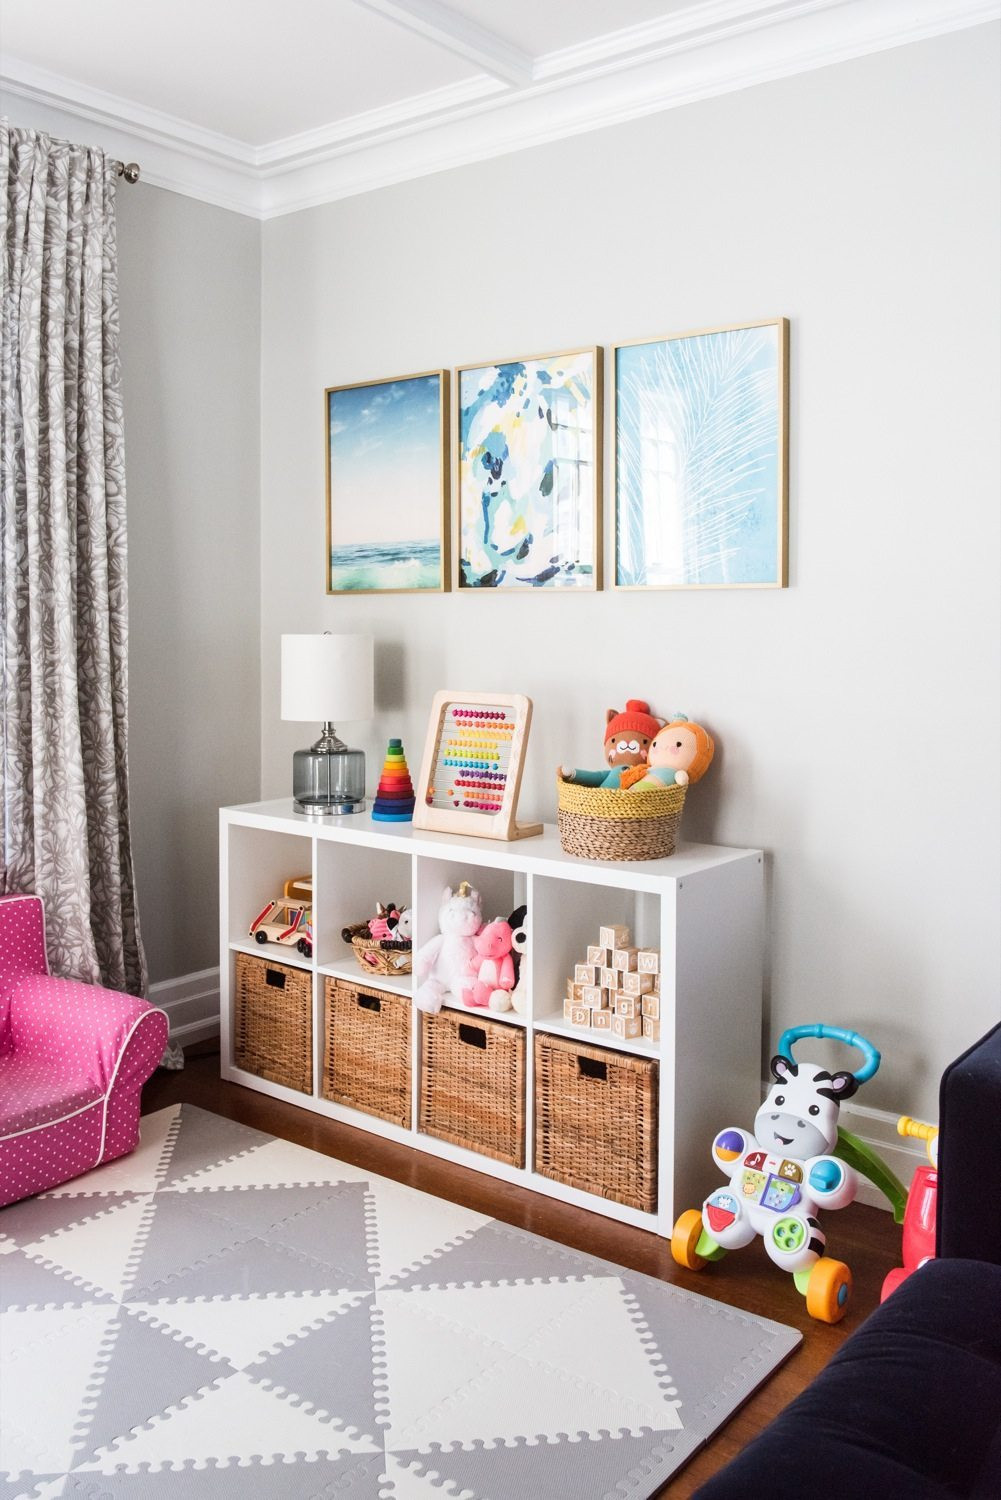 Kids Play Room Ideas
 Emerson s Modern Playroom Tour The Sweetest Occasion